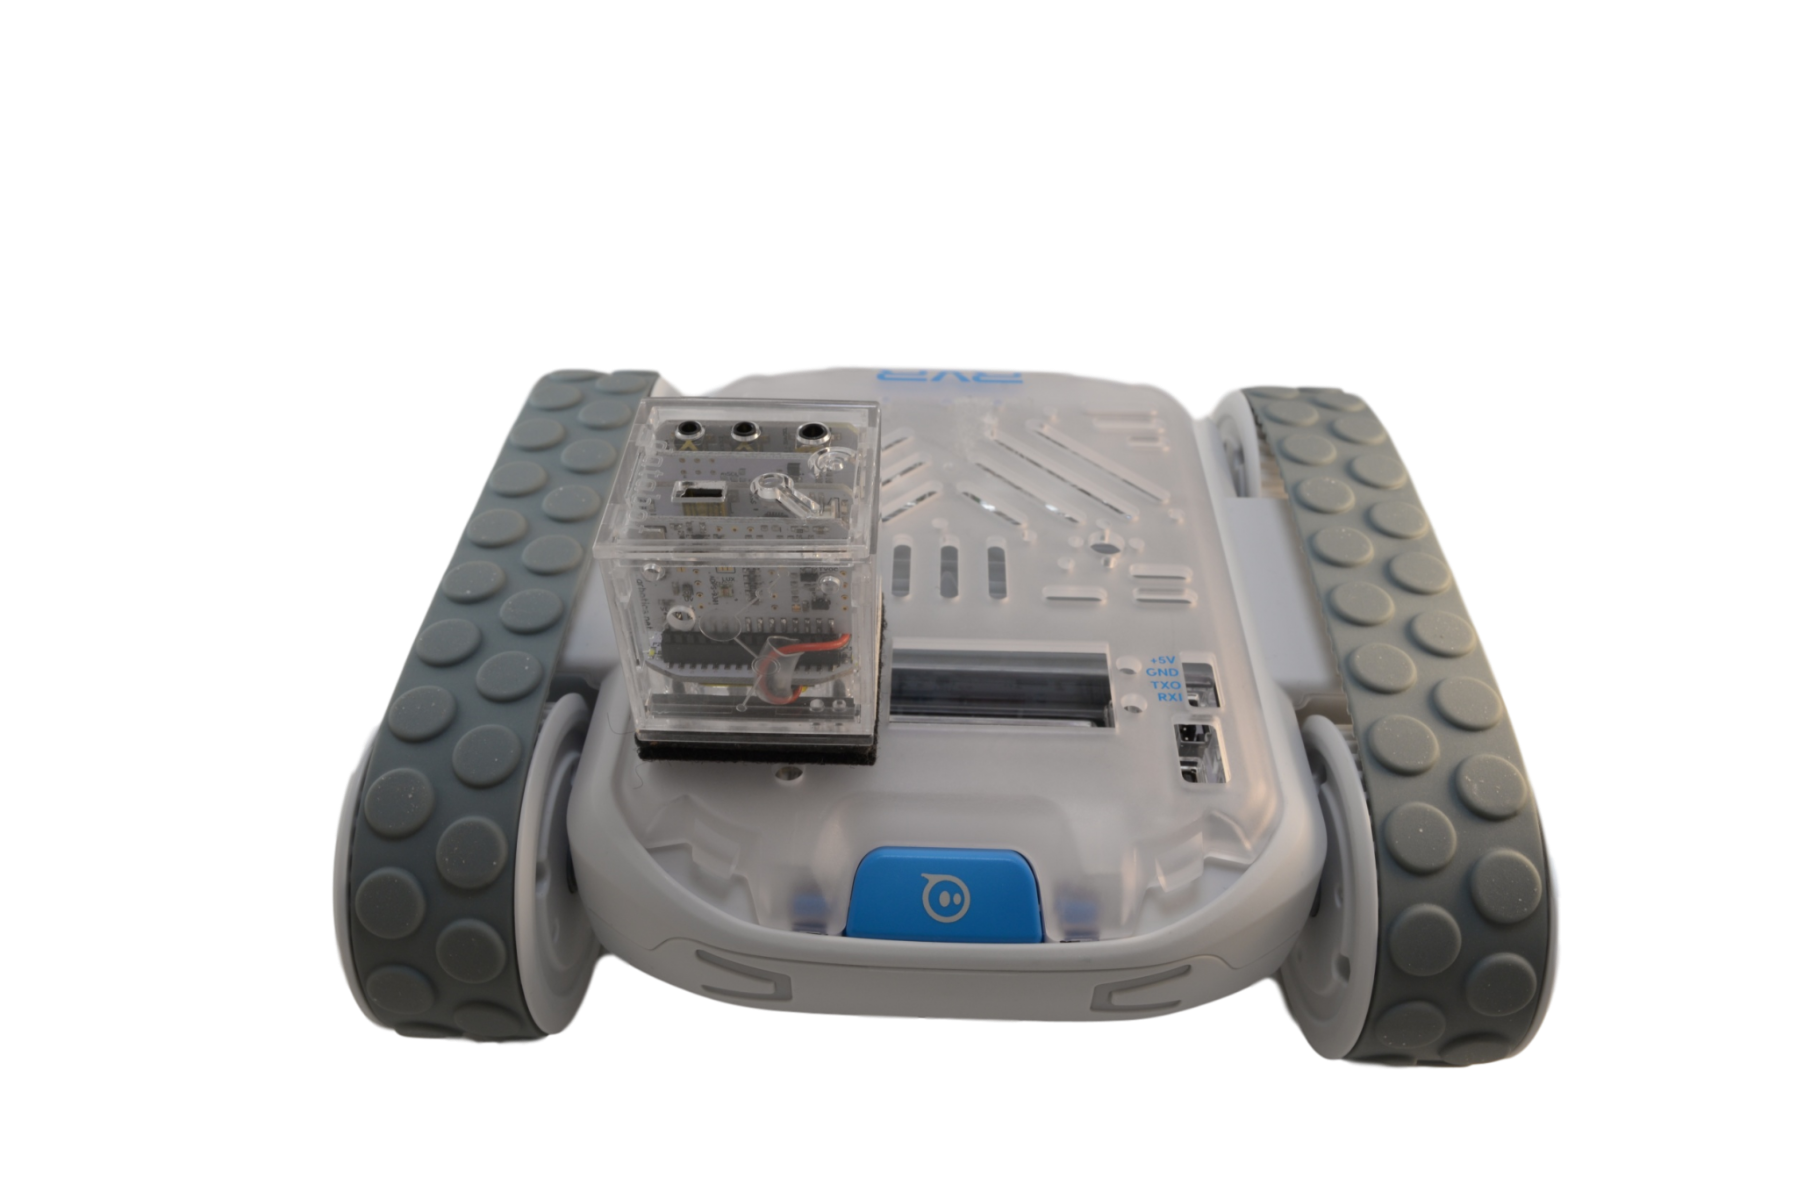 sphero rvr robot with databot robot mounted to its top side